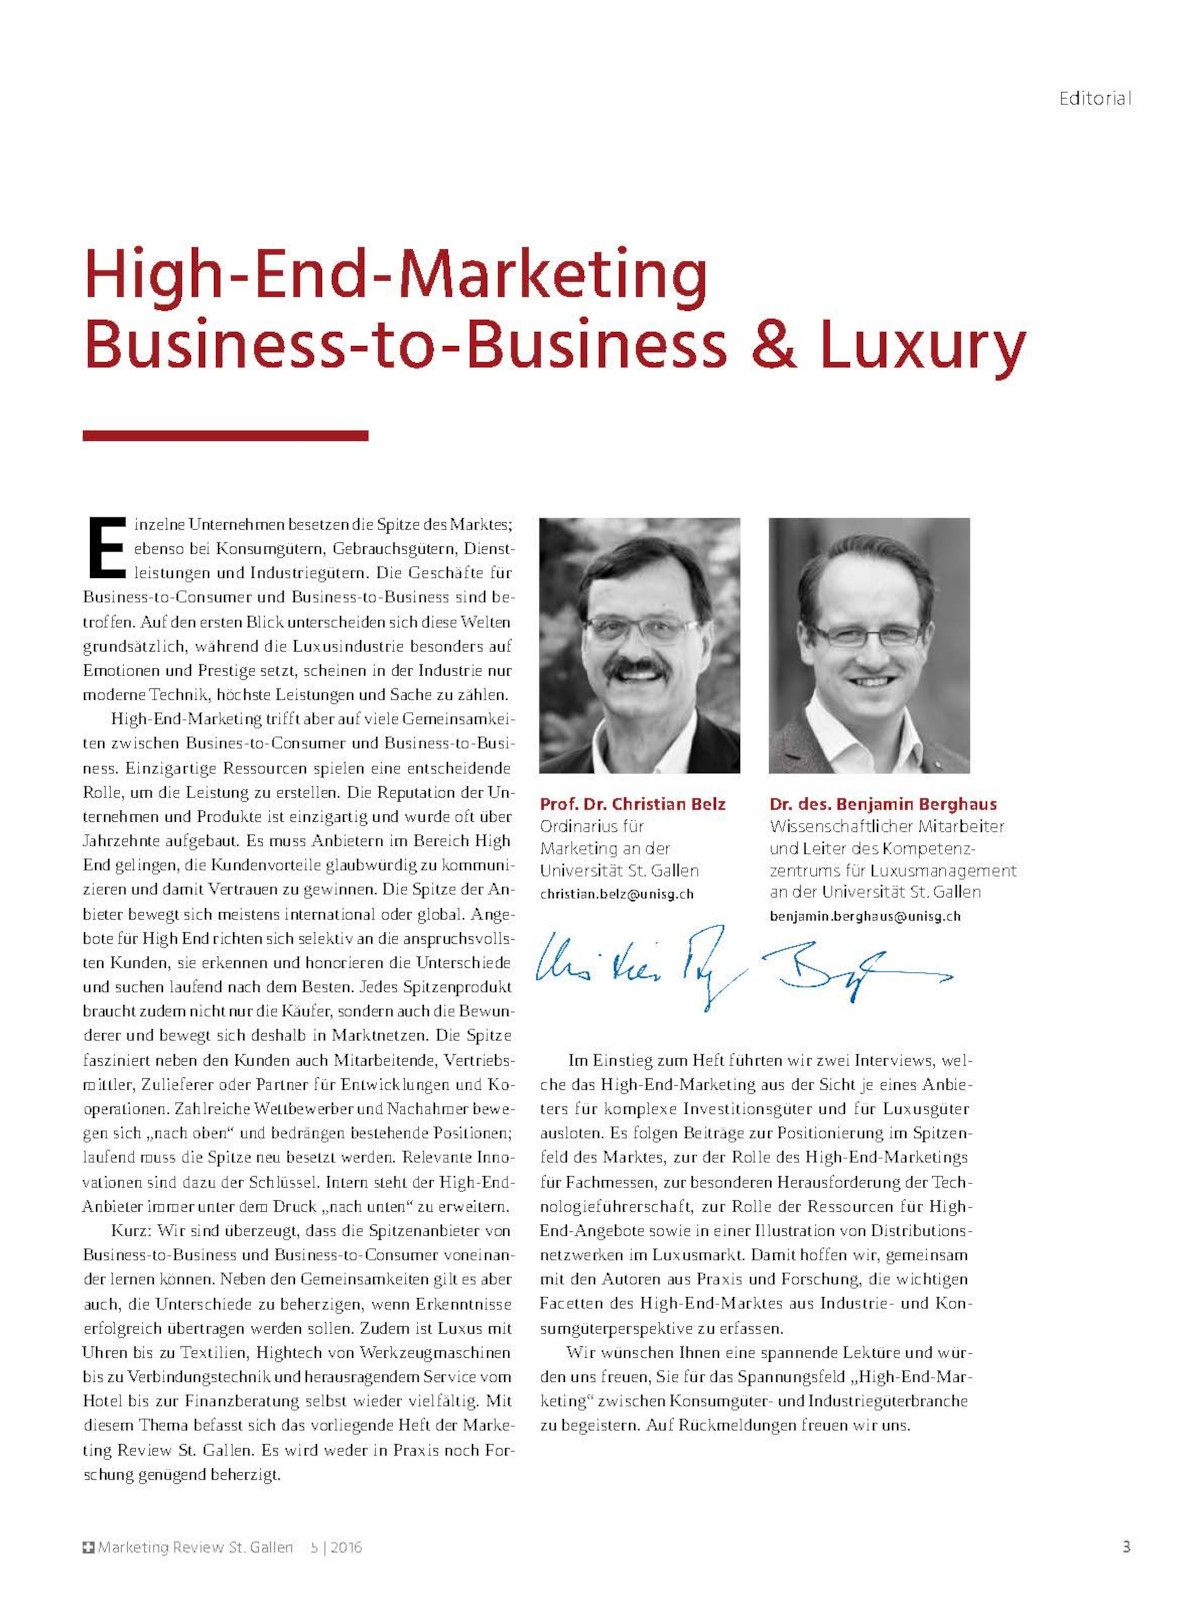 Marketing Review 5-2016 Editorial